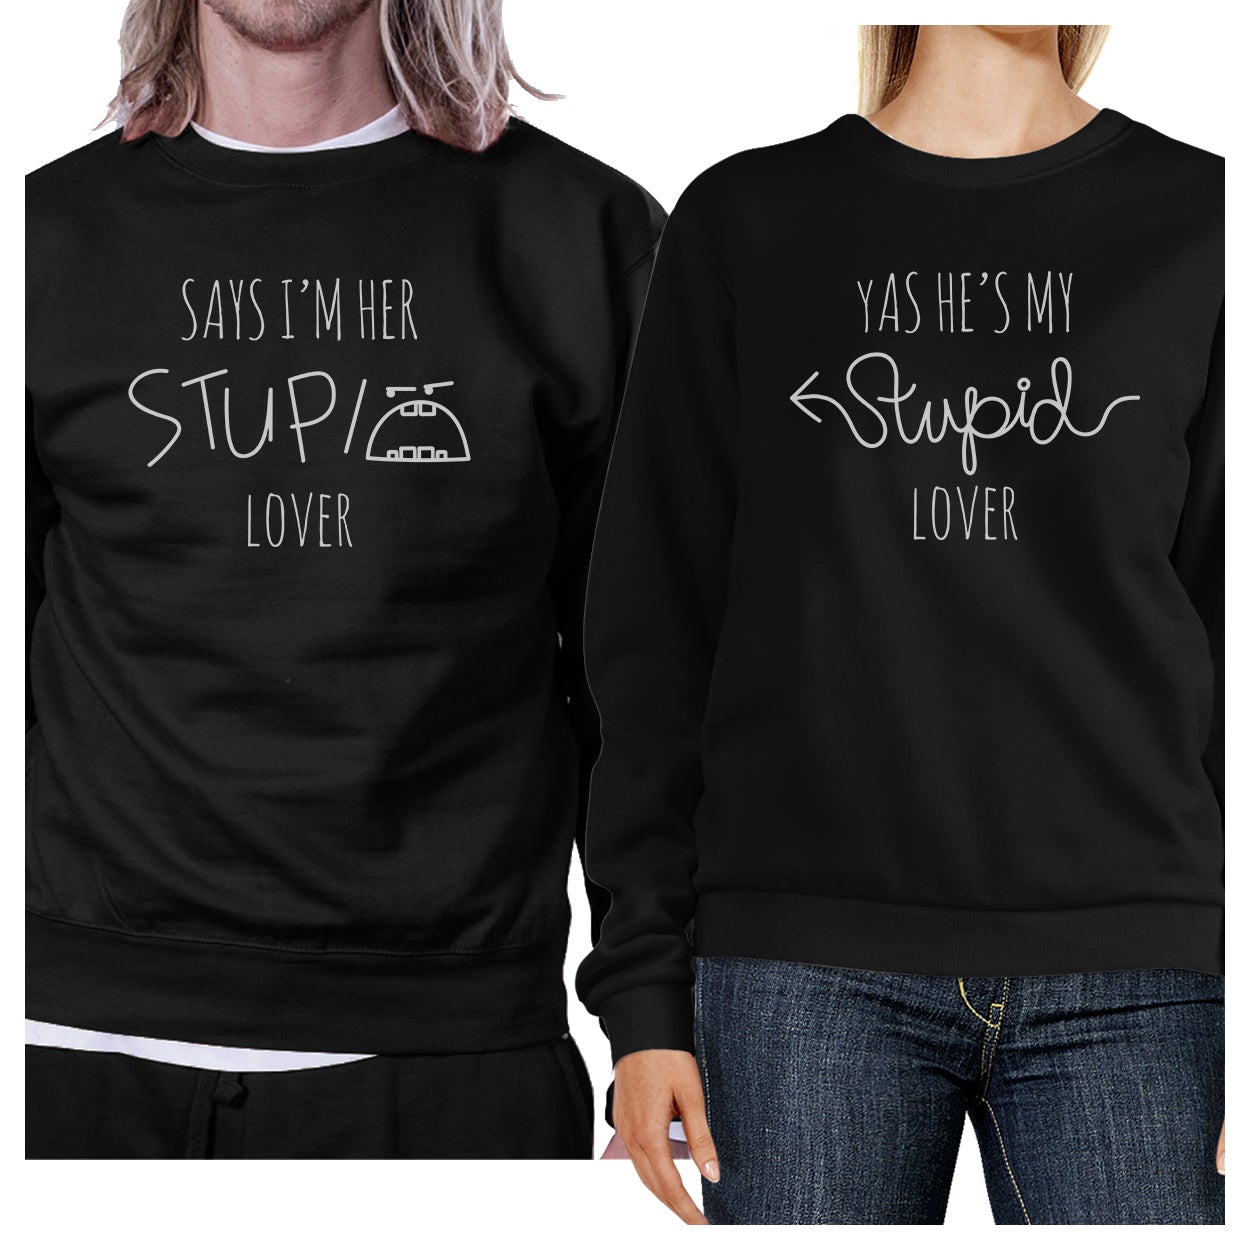 Her Stupid Lover And My Stupid Lover Matching Couple Black Sweatshirts